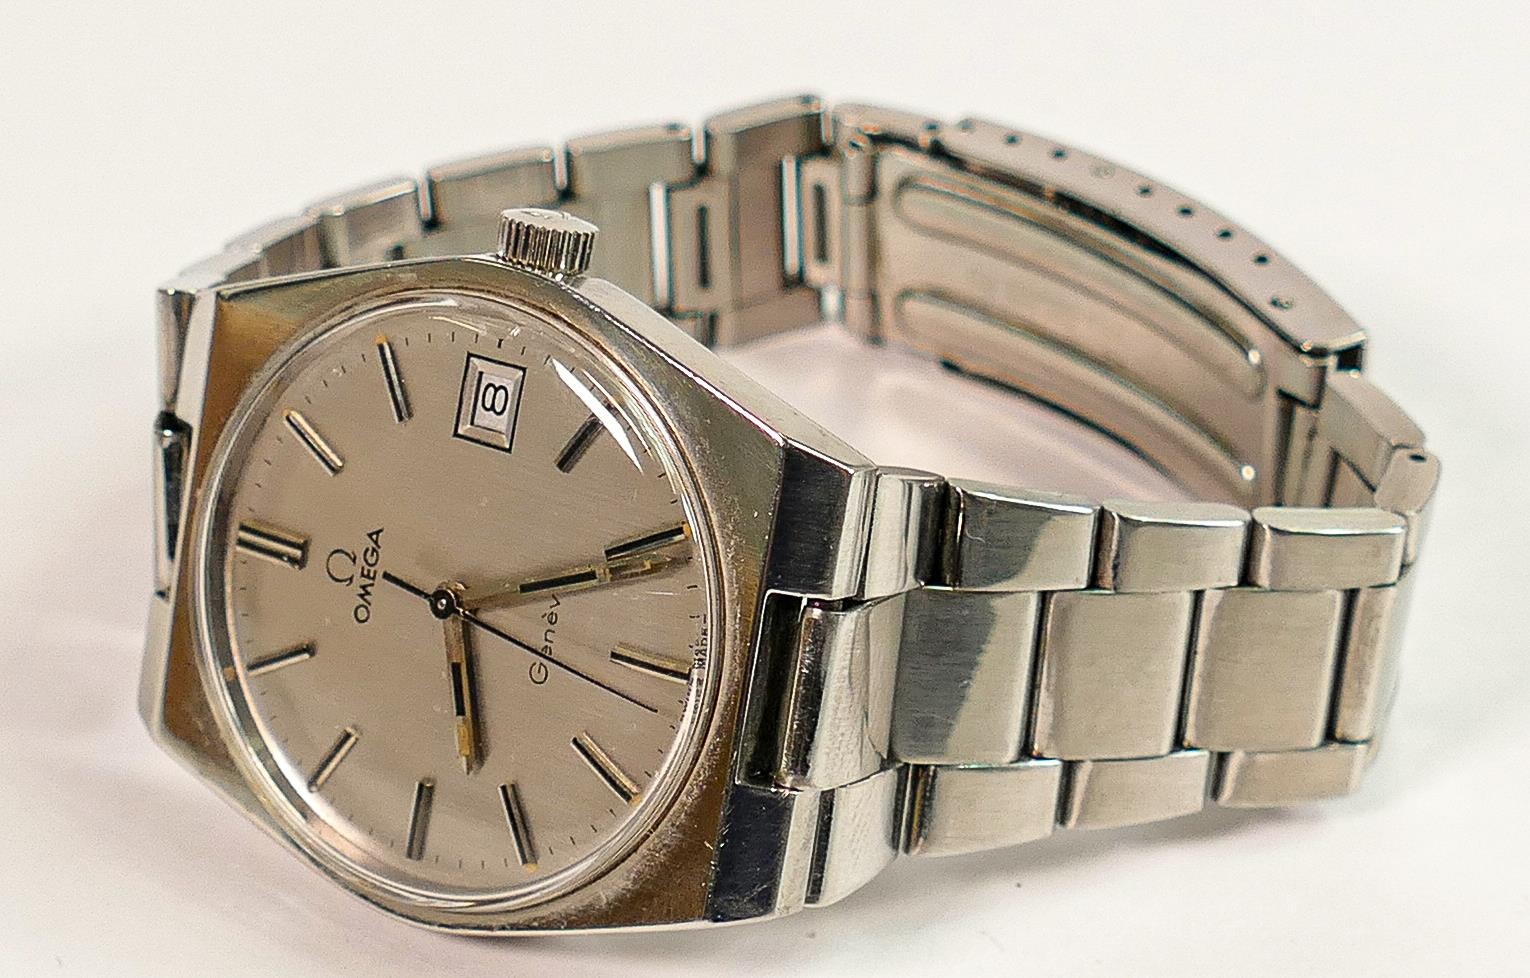 Omega Automatic Geneve gents watch with date: Manual wind. Case diameter 34mm excluding button. - Image 3 of 3